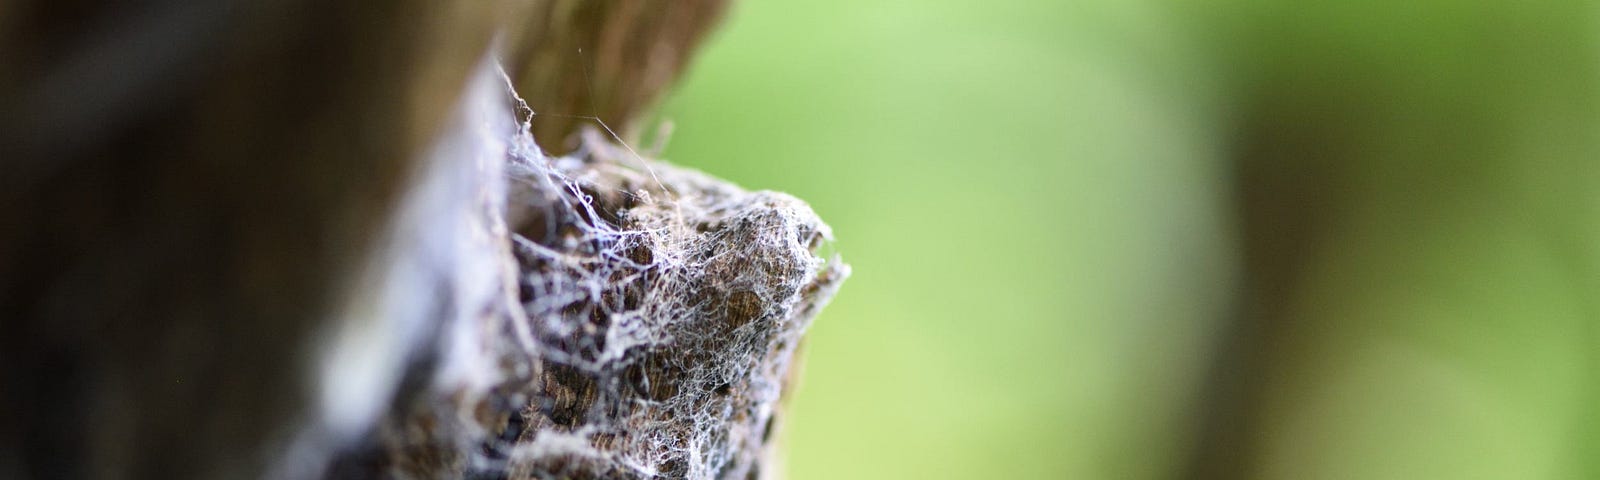 An image I didn’t initially include in my selection: cobwebs on a tree trunk. Exported from NX Studio with the in-camera settings and exposure compensation dialed up a bit. Oberhausen, Germany, September 29, 2023.